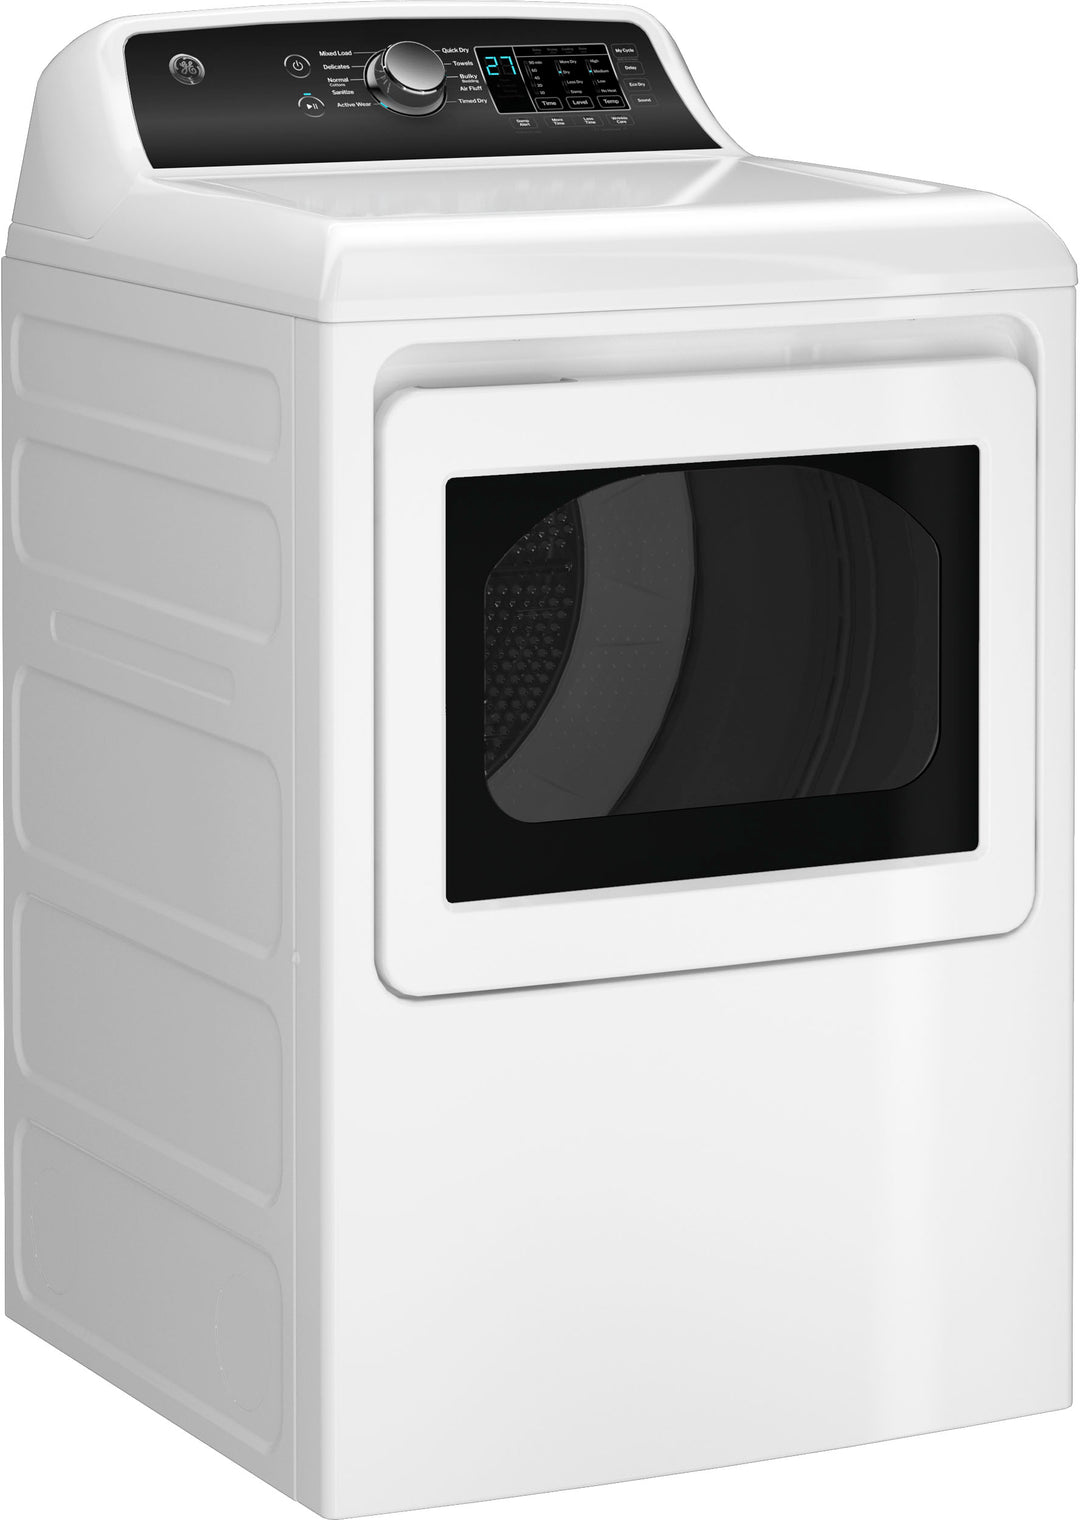 GE - 7.4 cu. ft. Top Load Gas Dryer with Sensor Dry - White on White_1